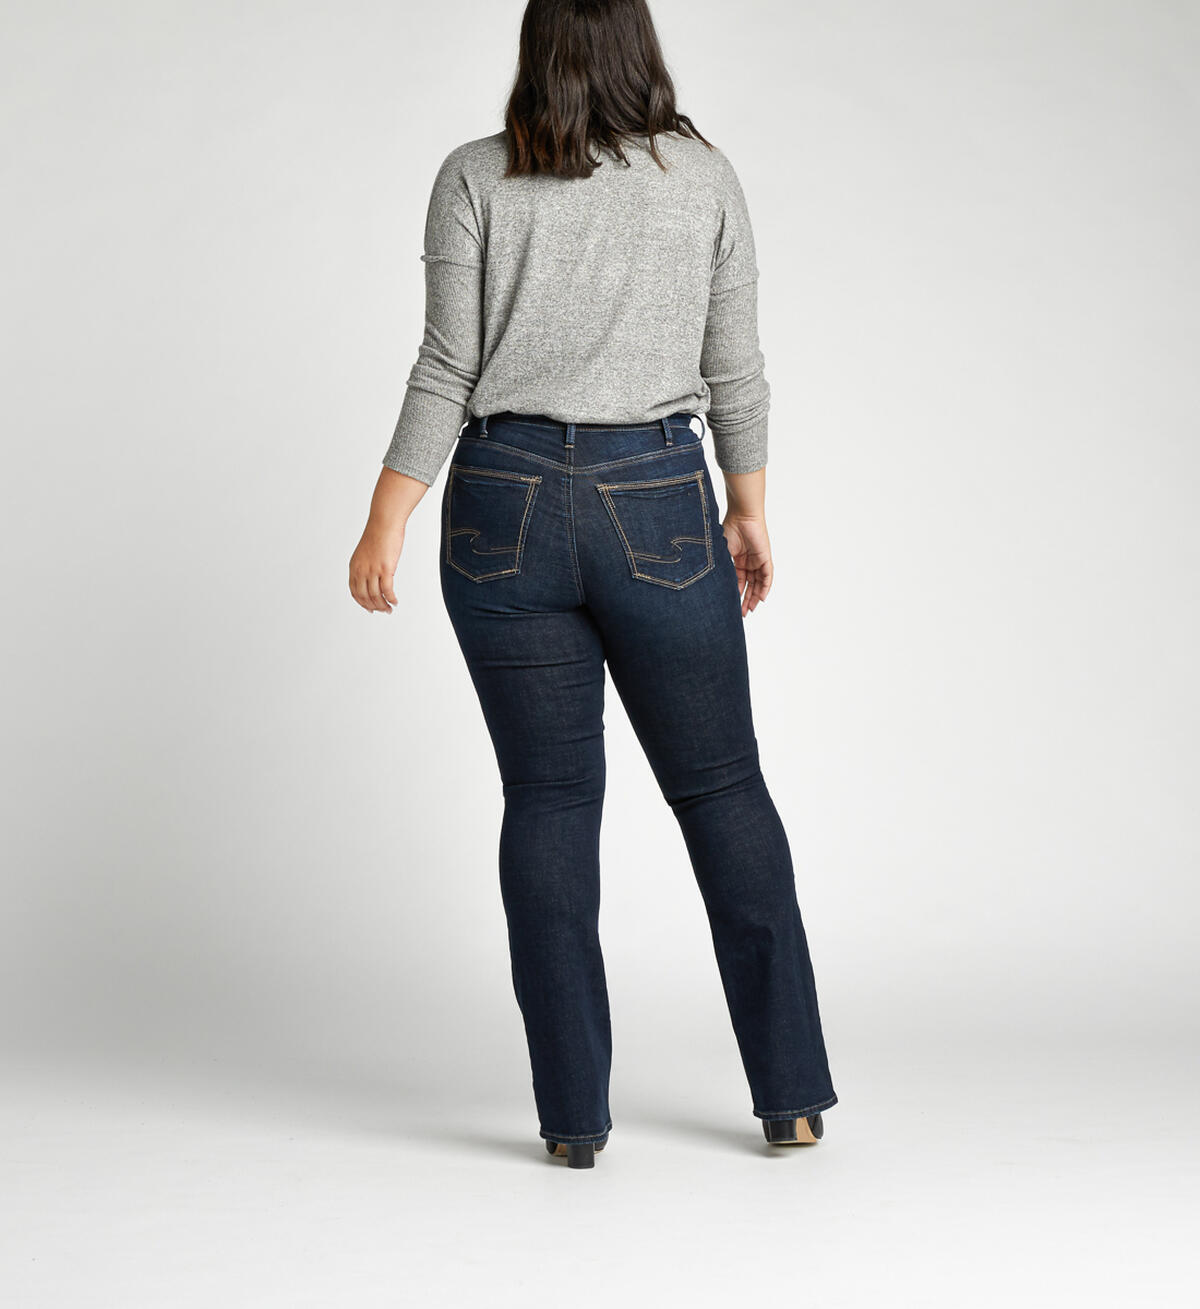 Calley Super High Rise Slim Bootcut Plus Size Jeans, , hi-res image number 1